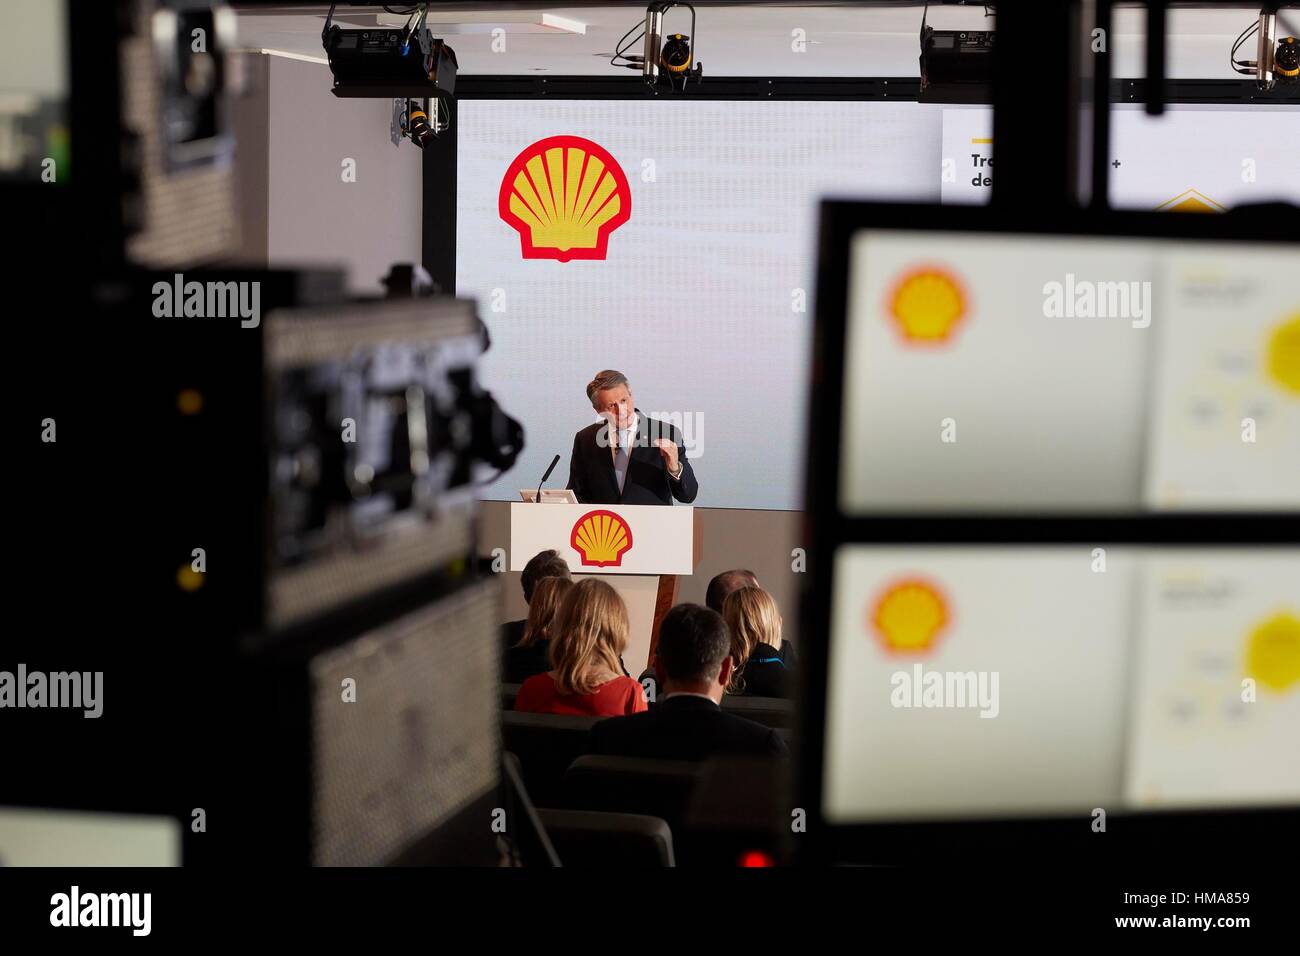 London, UK. 2nd Feb, 2017. Royal Dutch Shell Plc announced their 4th Quarter and Full Year 2016 Results. Royal Dutch Shell Chief Executive Officer Ben van Buerden commented: “We are reshaping Shell and delivered a good cash flow performance this quarter with over $9 billion in cash flow from operations. Debt has been reduced and, for the second consecutive quarter, free cash flow more than covered our cash dividend…” Credit: Newscast Online Limited/Alamy Live News Stock Photo